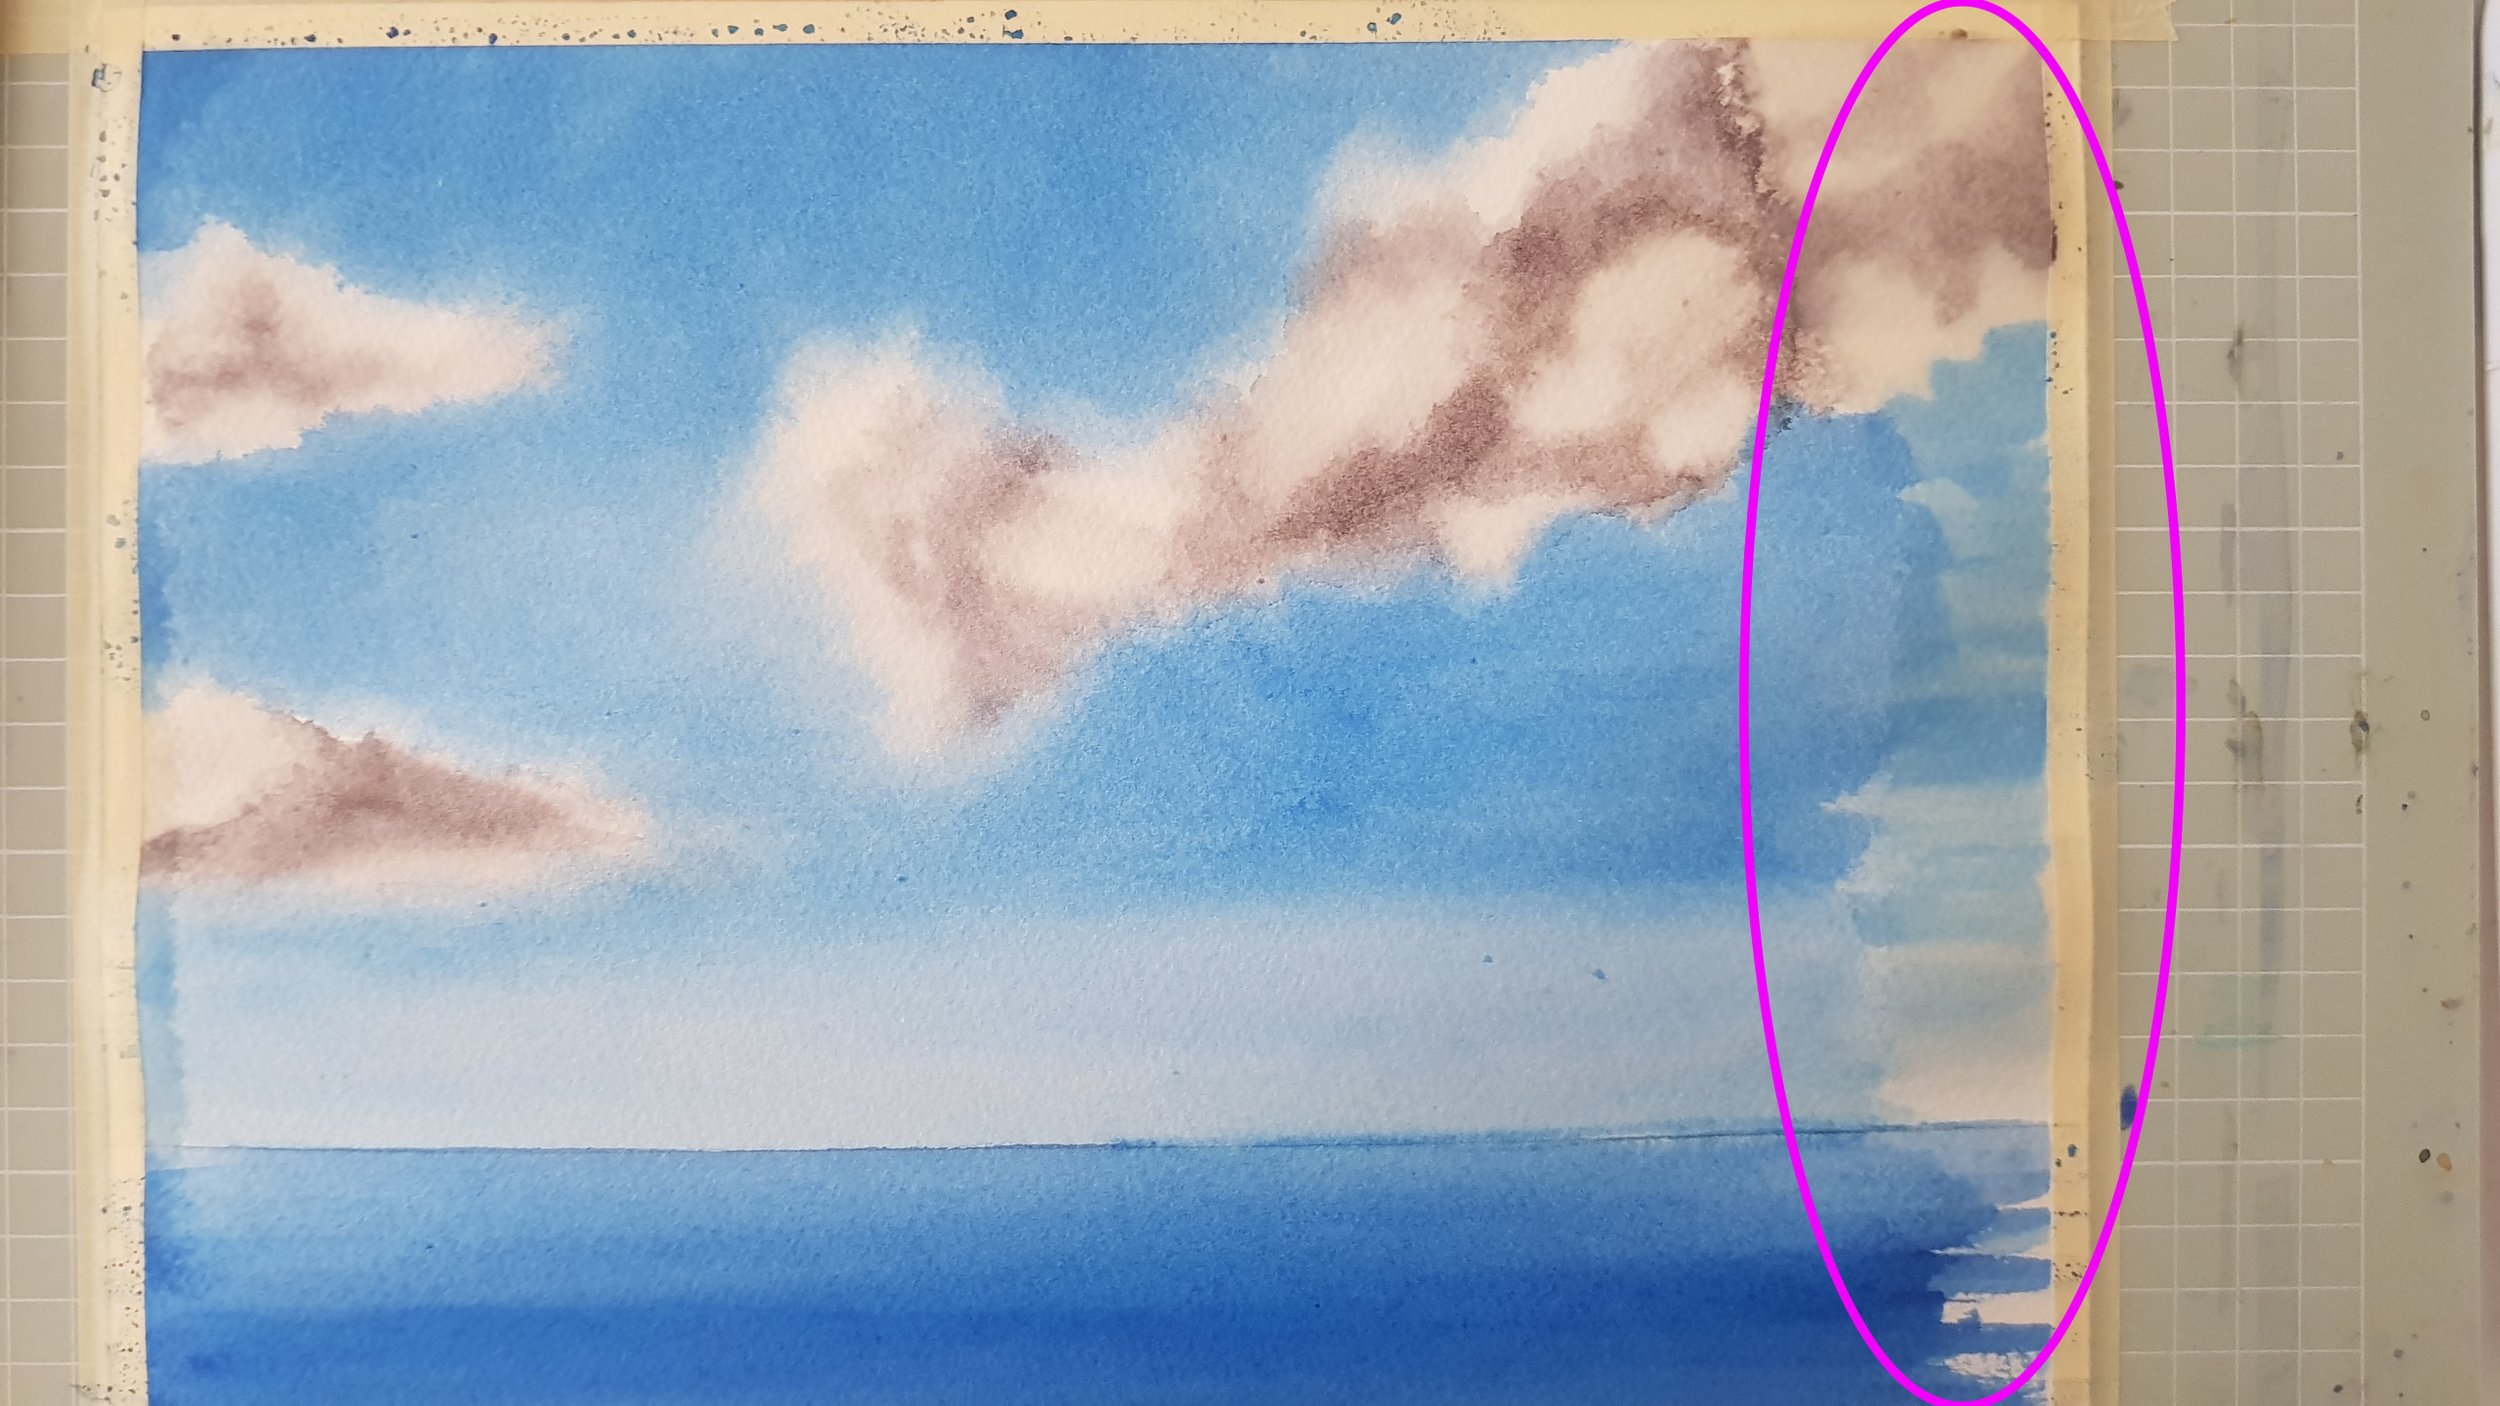 Watercolor Paper Gone Bad - colors look muted